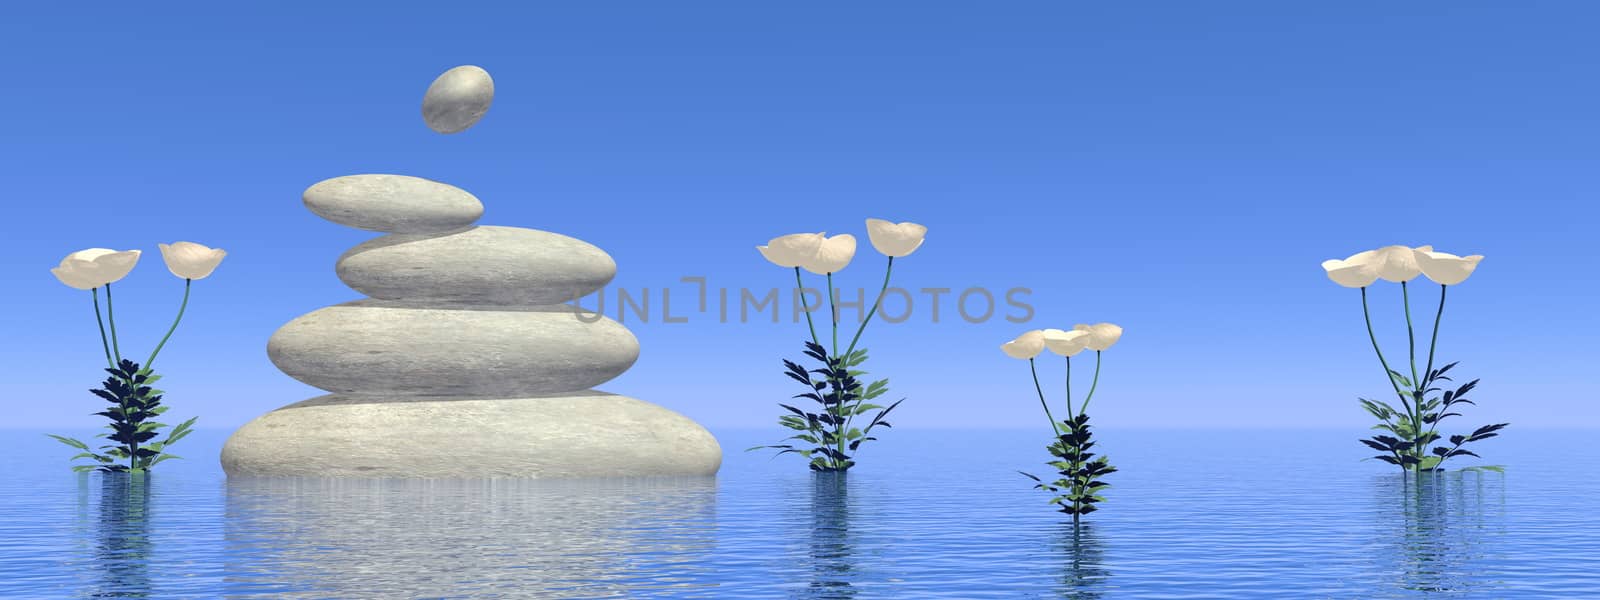 White poppies next to balanced stones upon water by day - 3D render